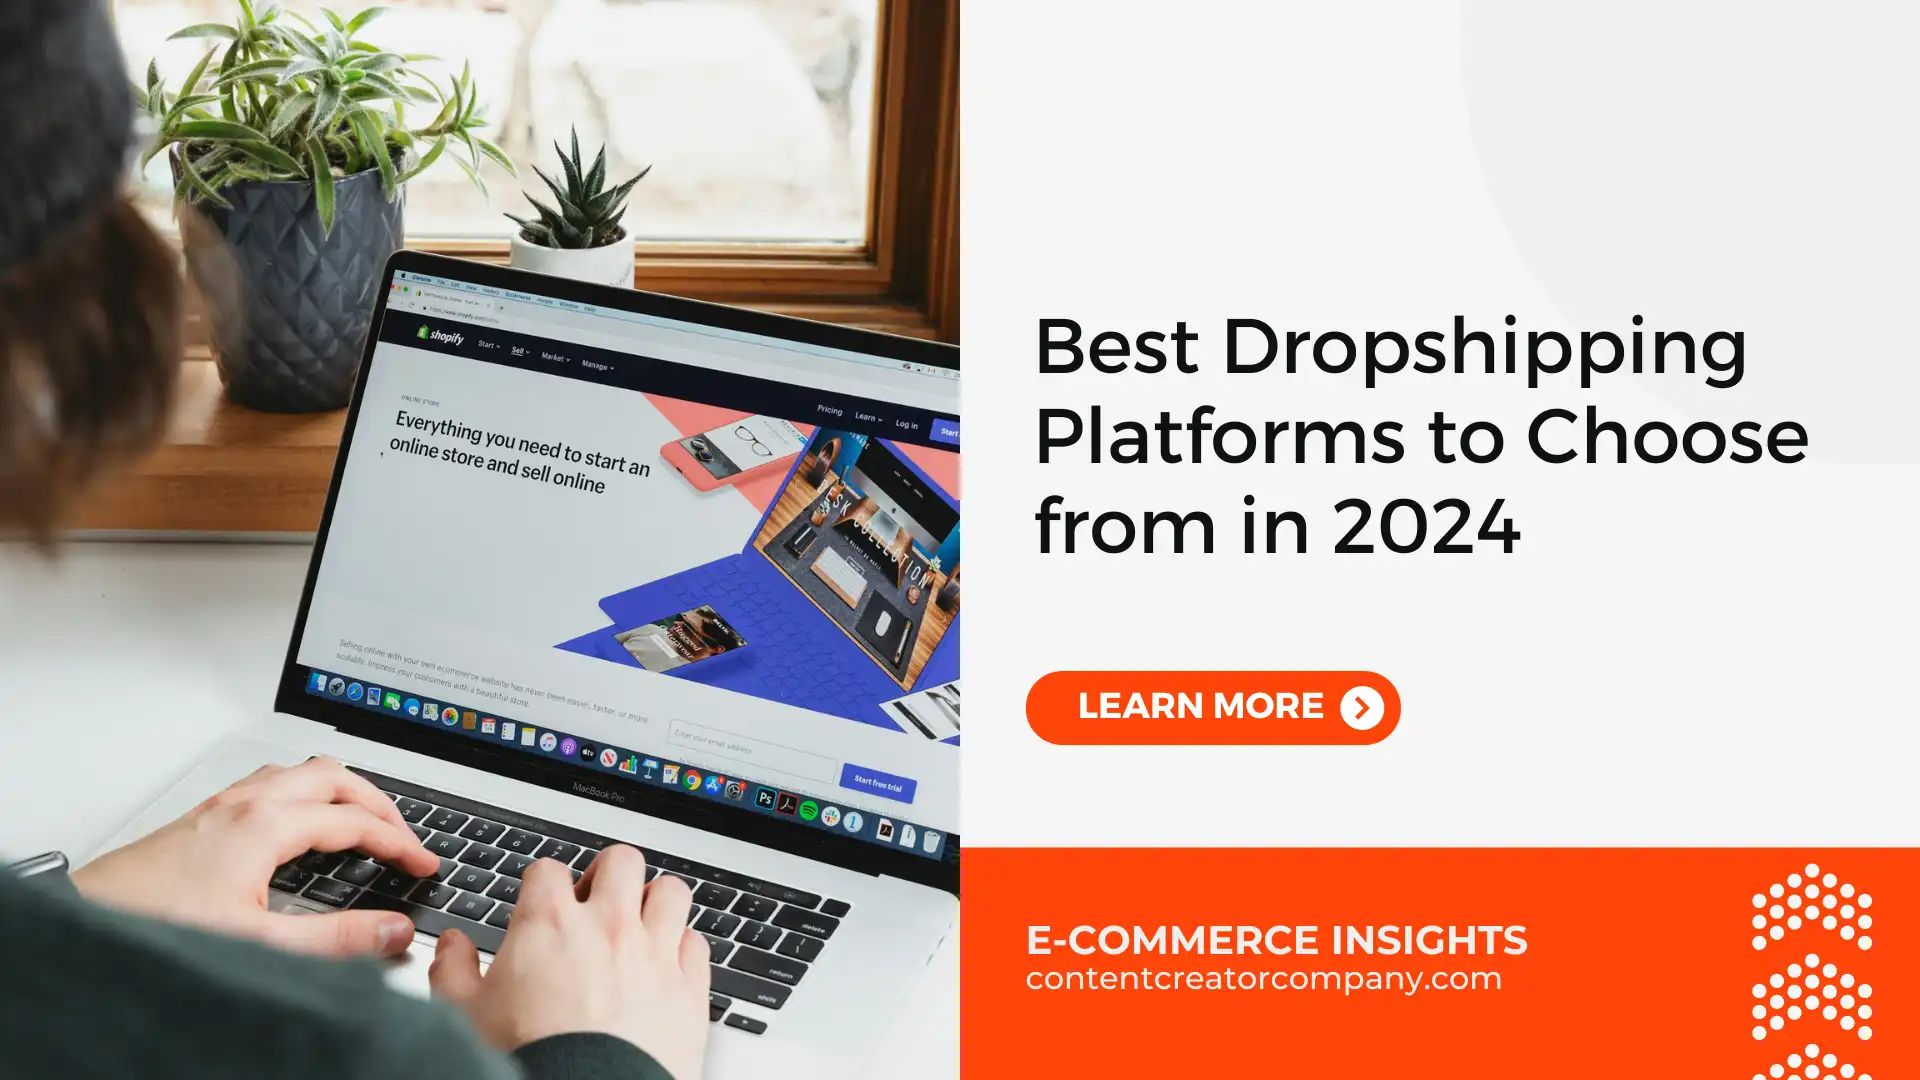 Best Dropshipping Platforms to Choose from in 2024